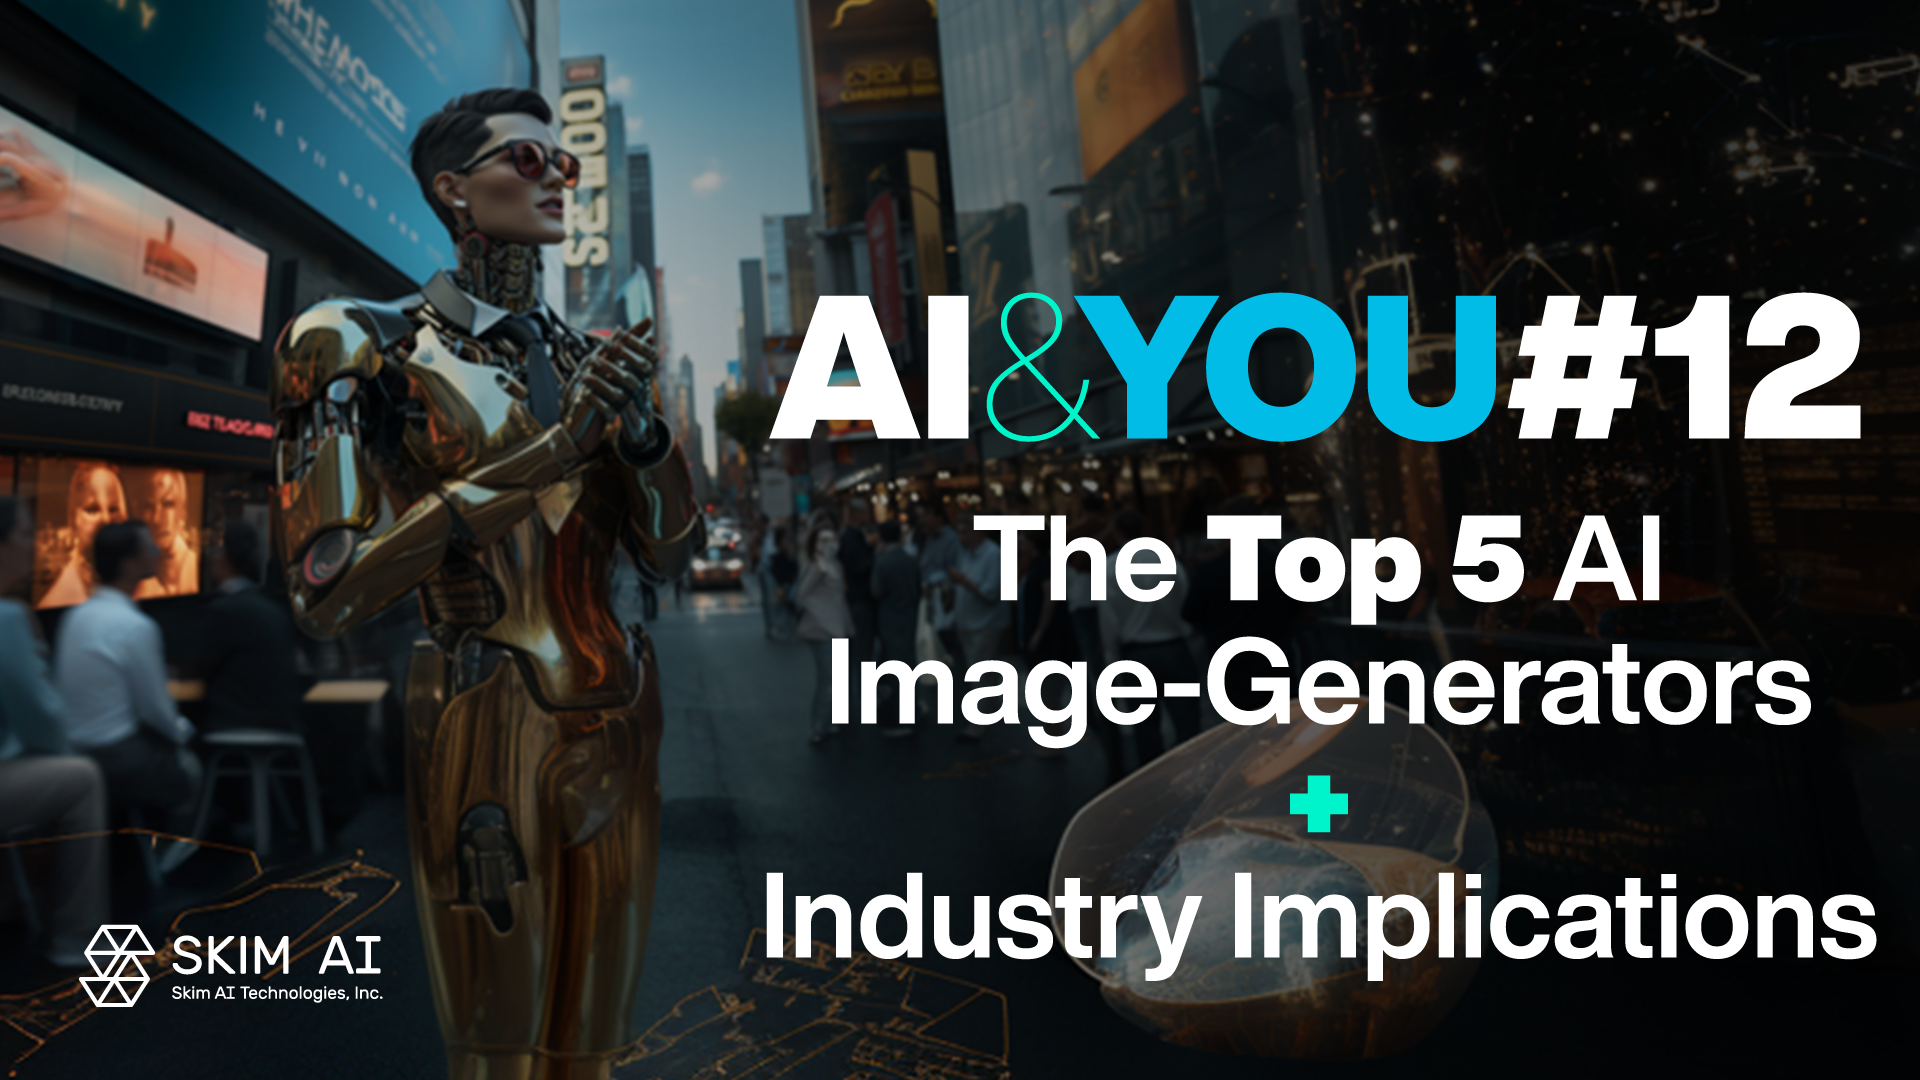 AI & YOU #12: The Top 5 AI Image-Generators + Industry Implications